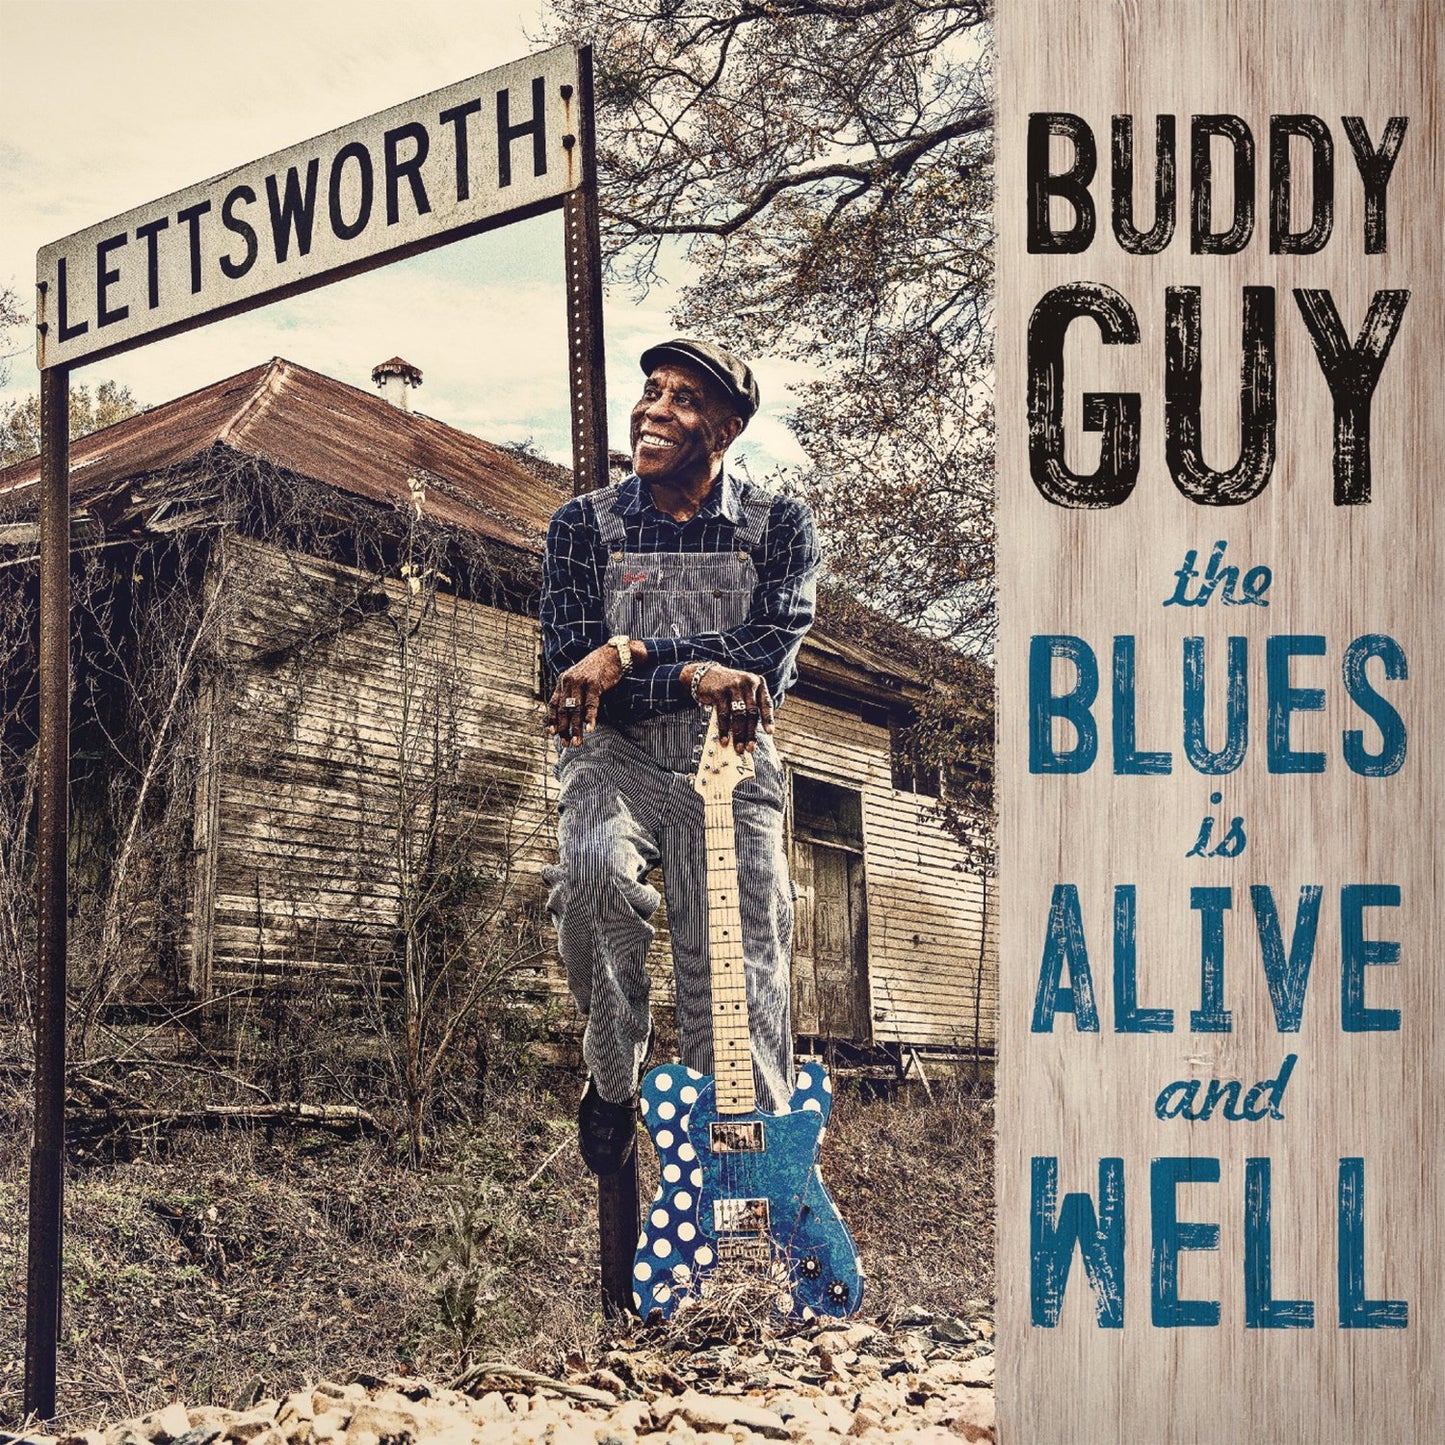 Buddy Guy - The Blues Is Alive And Well - CD